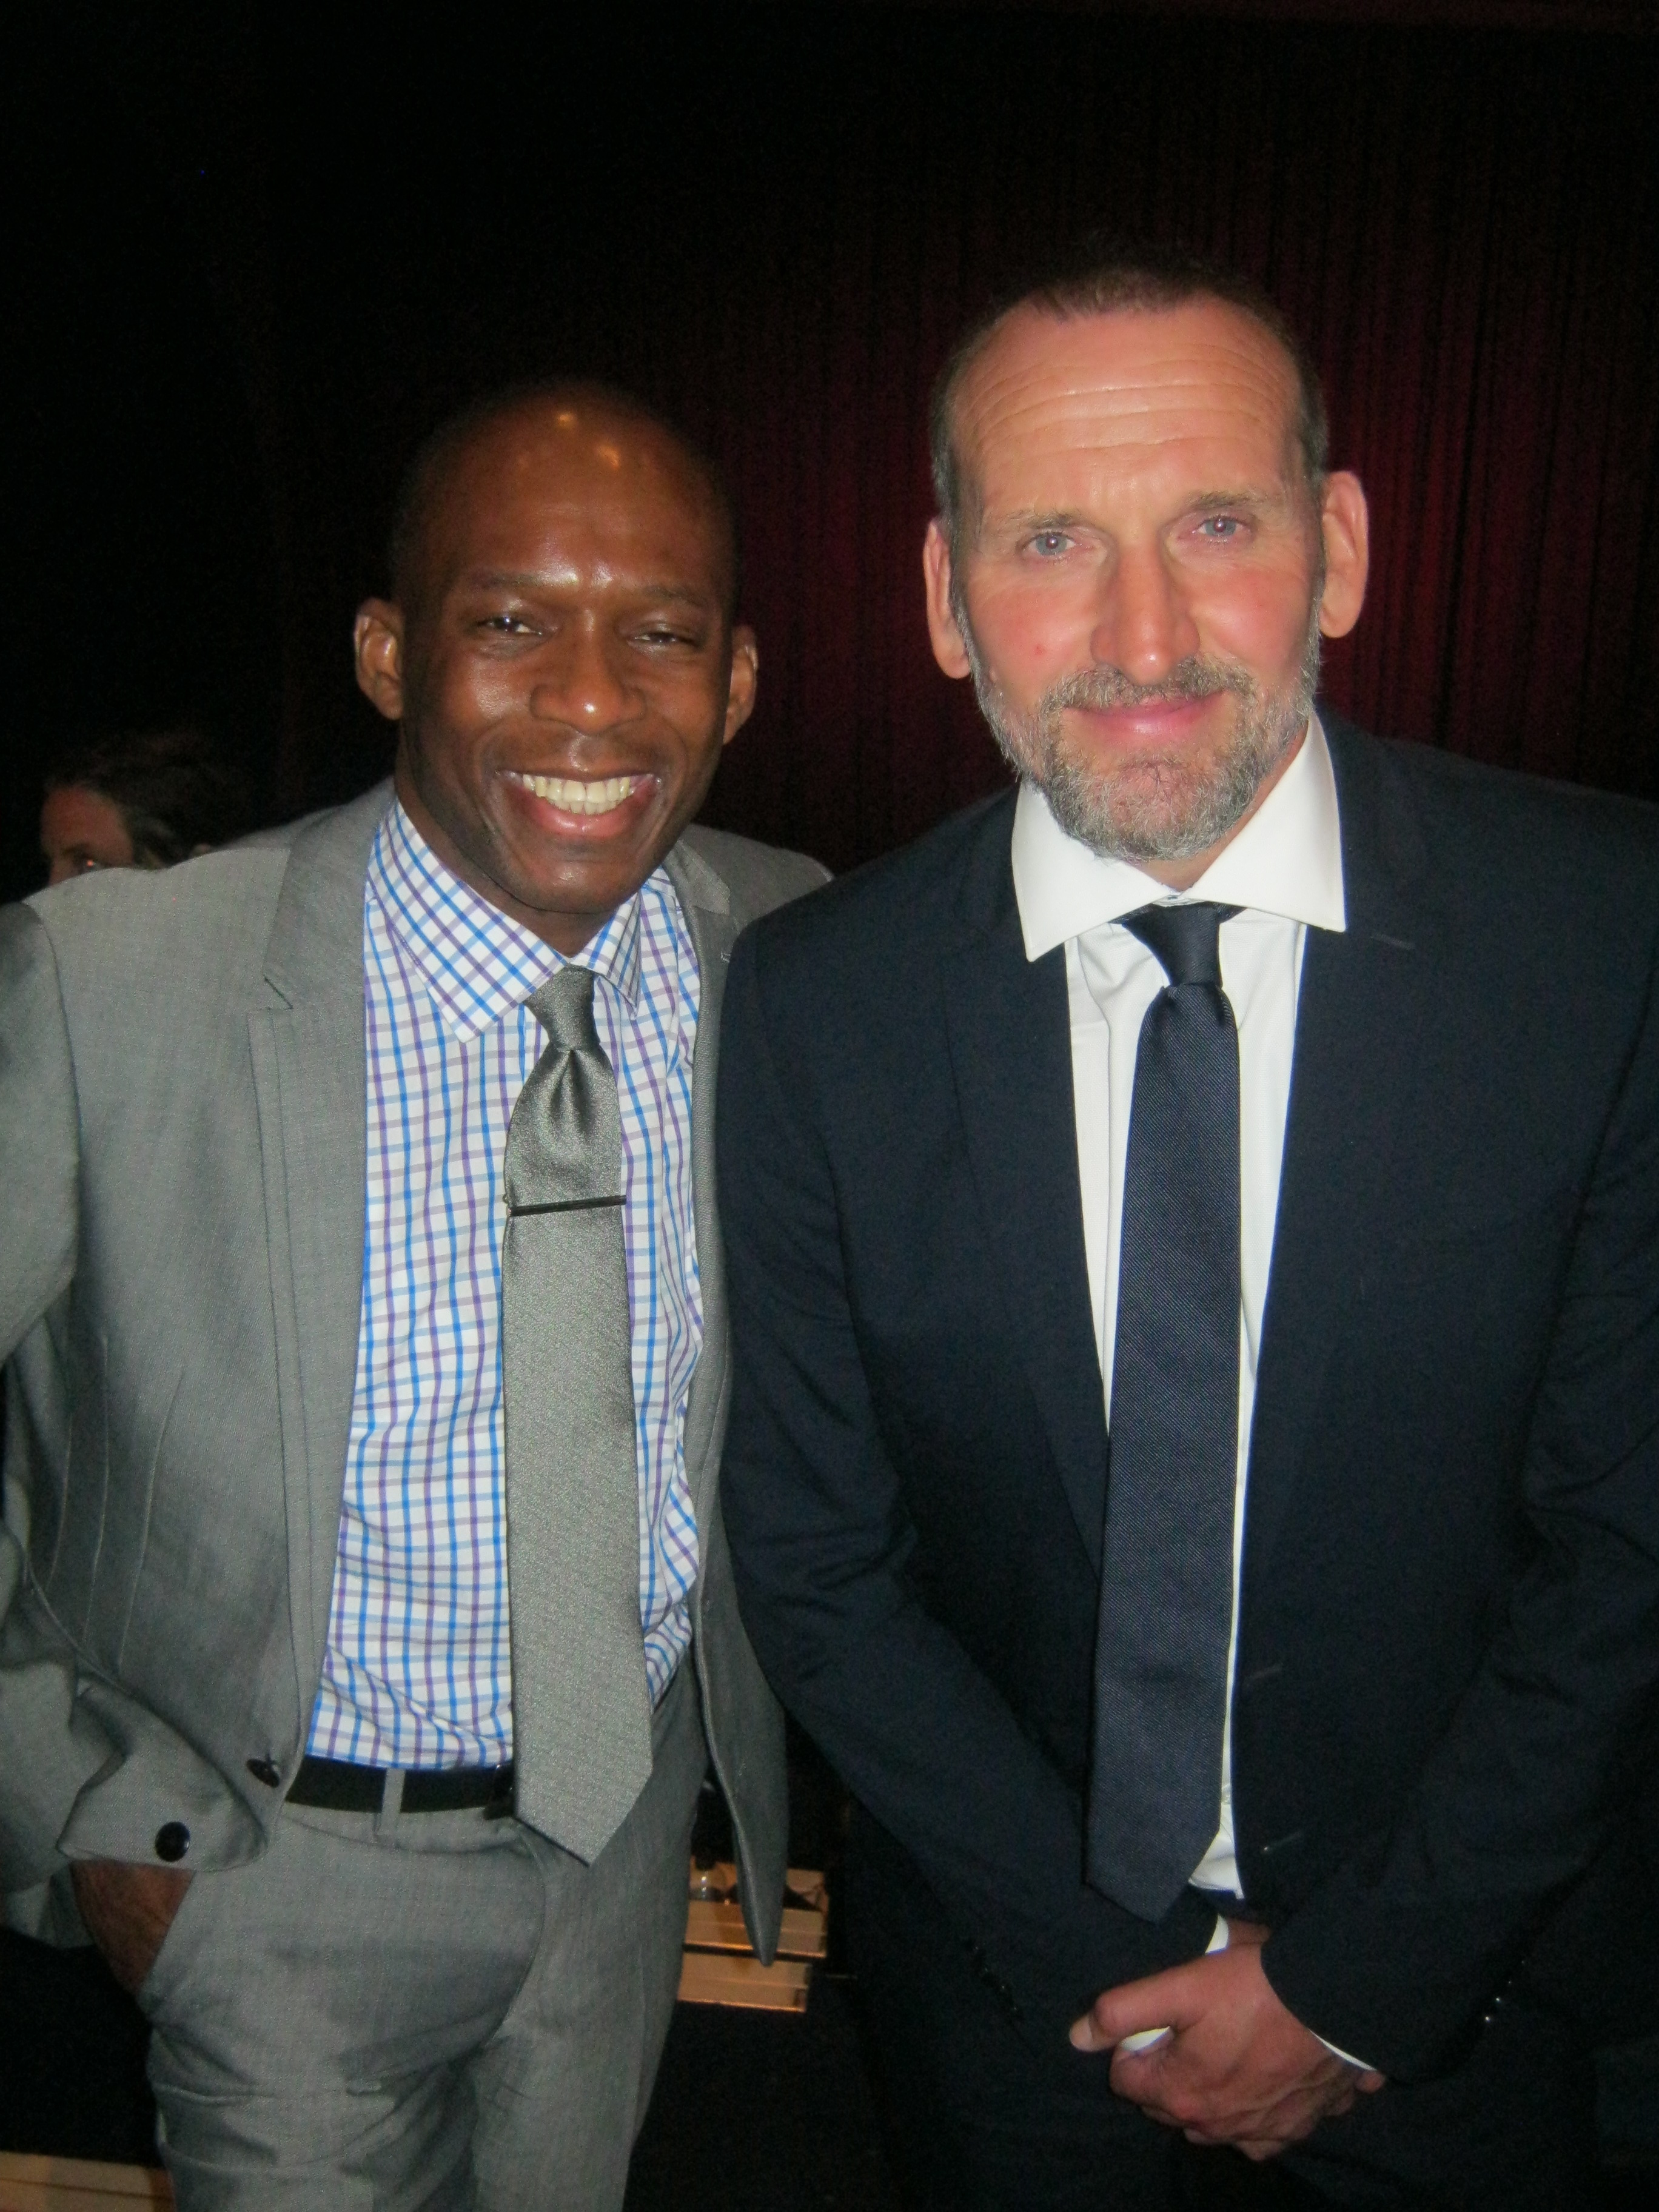 David Olawale Ayinde with former Doctor Who Actor Christopher Eccleston